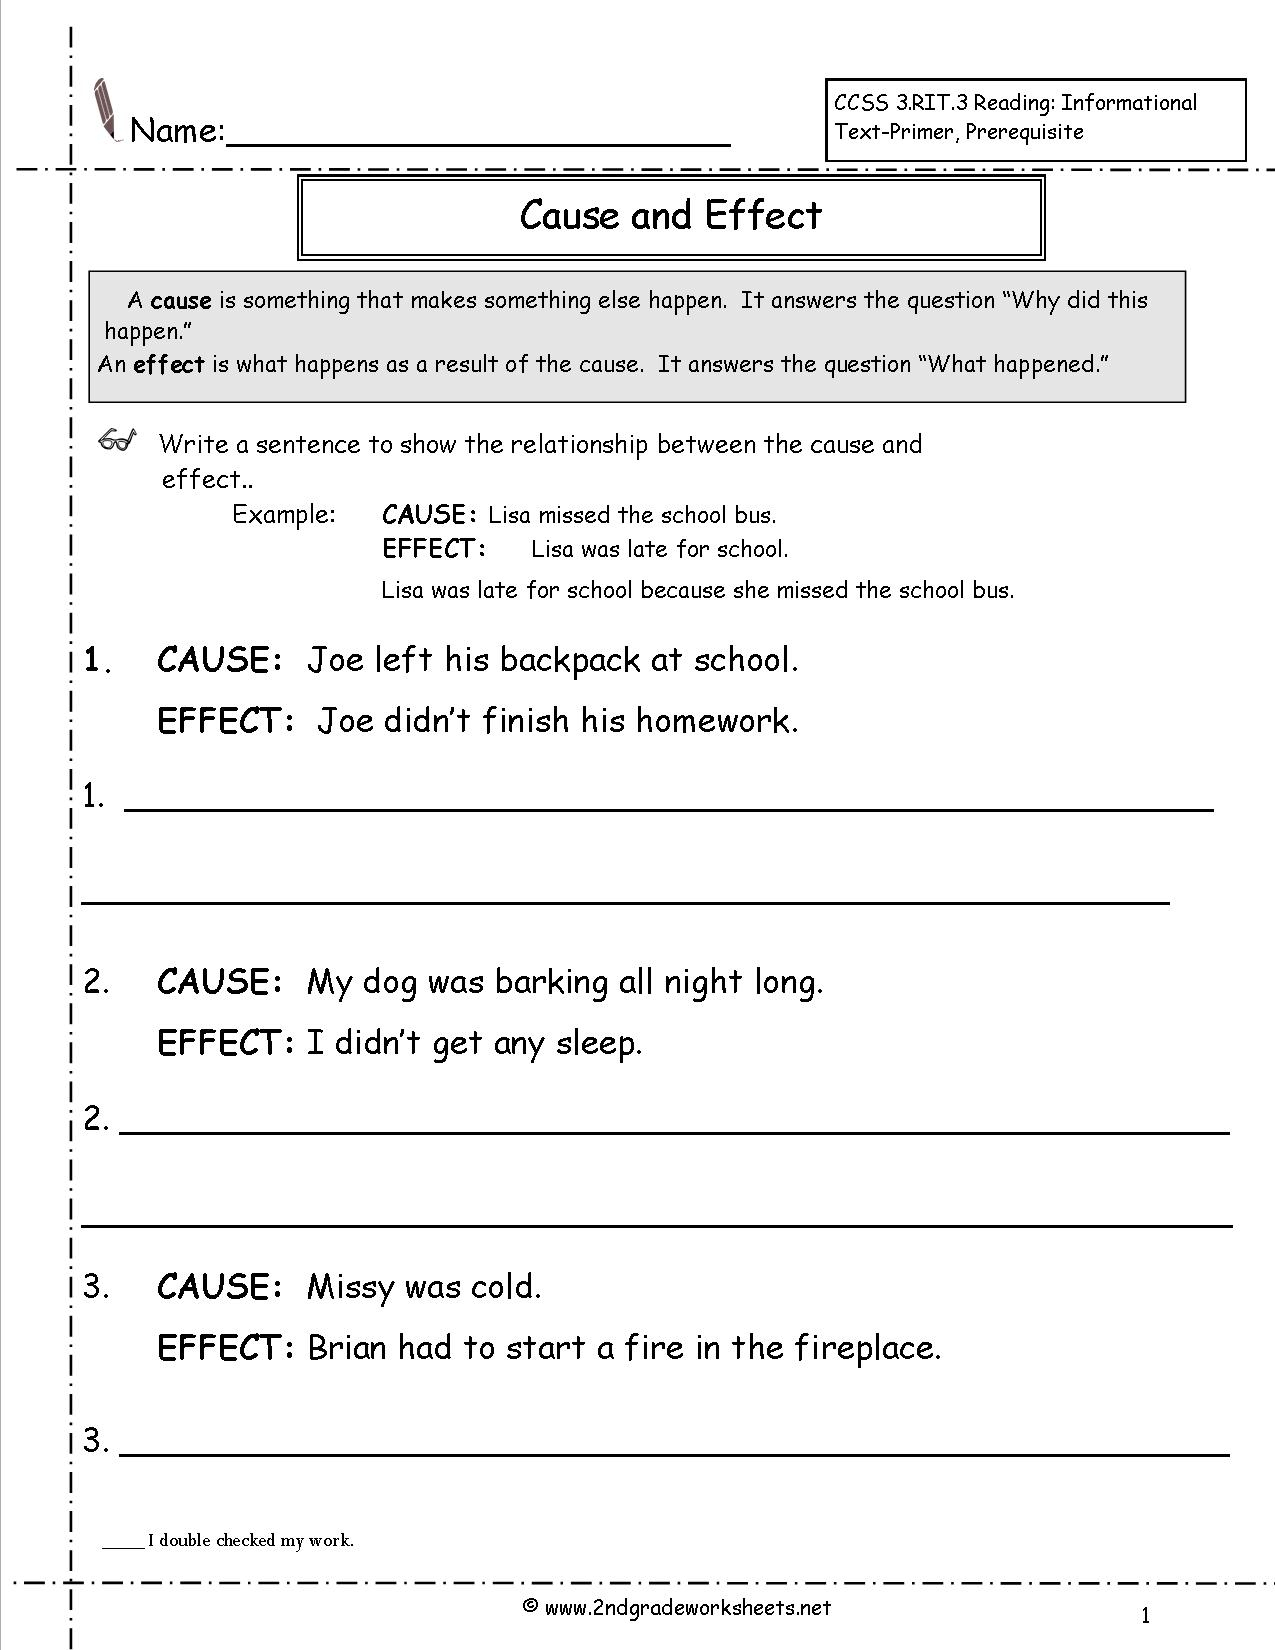 cause-and-effect-lesson-plan-3rd-grade-lesson-plans-learning